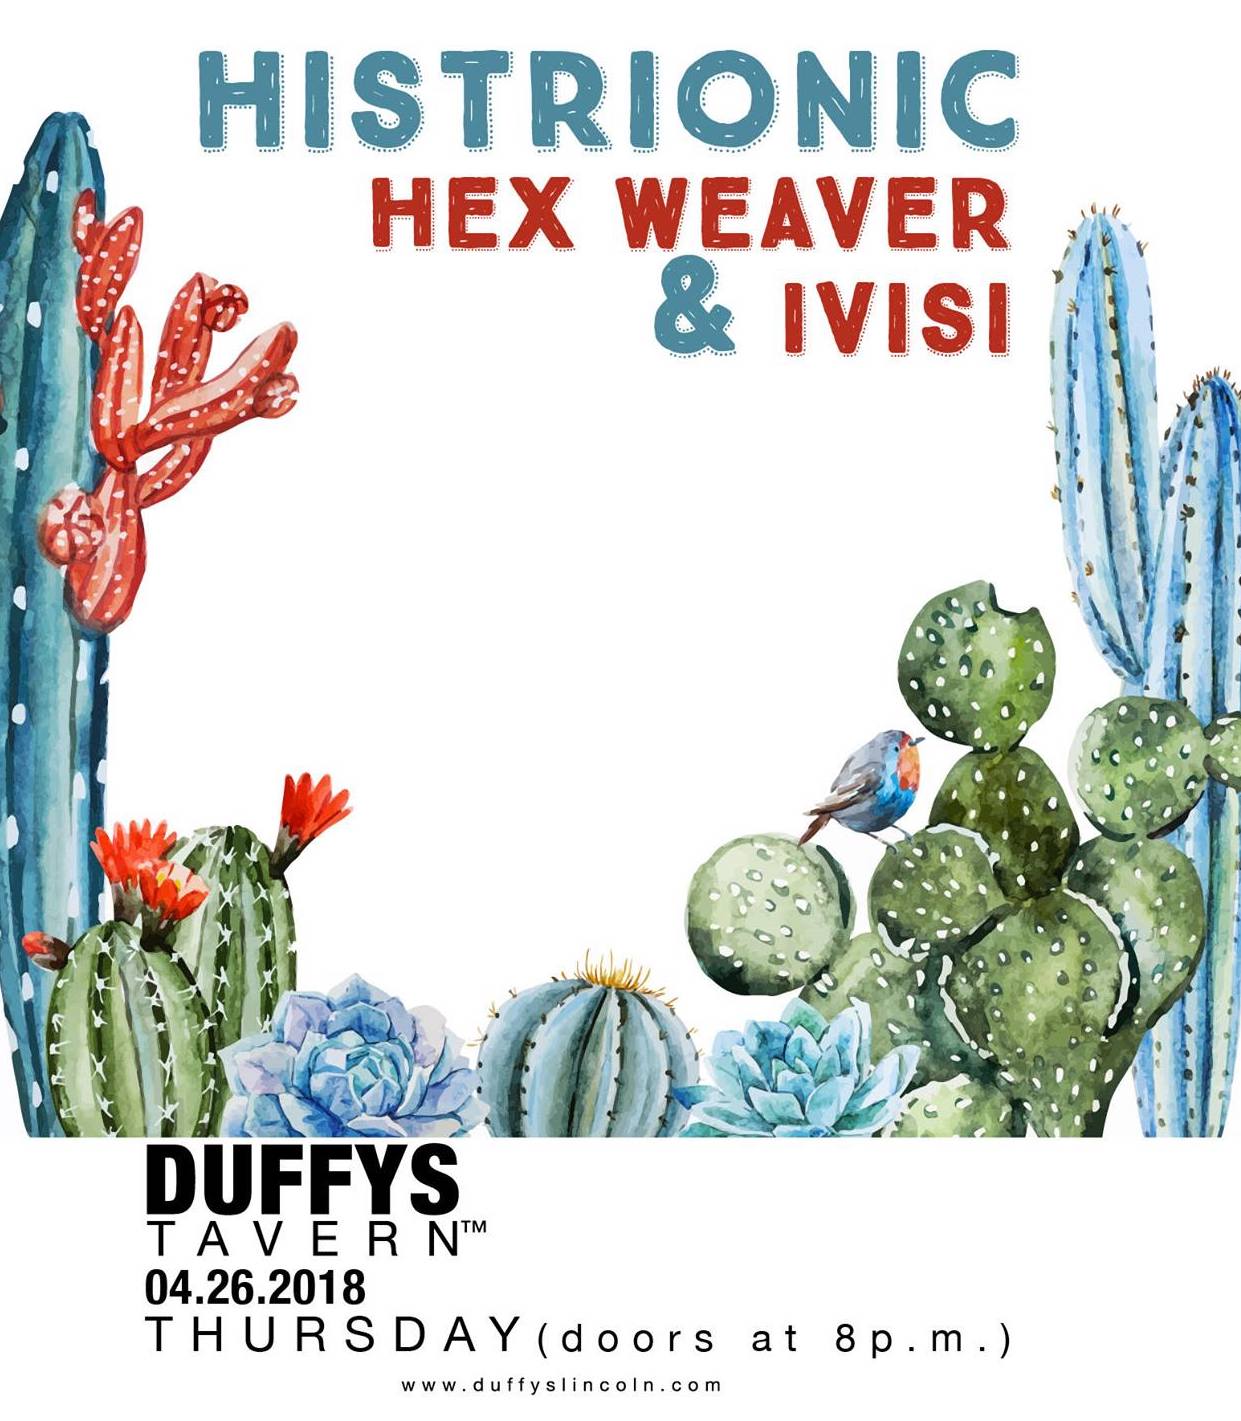 Histrionic, Hex Weaver, and Ivisi at Duffys Tavern on April 26th